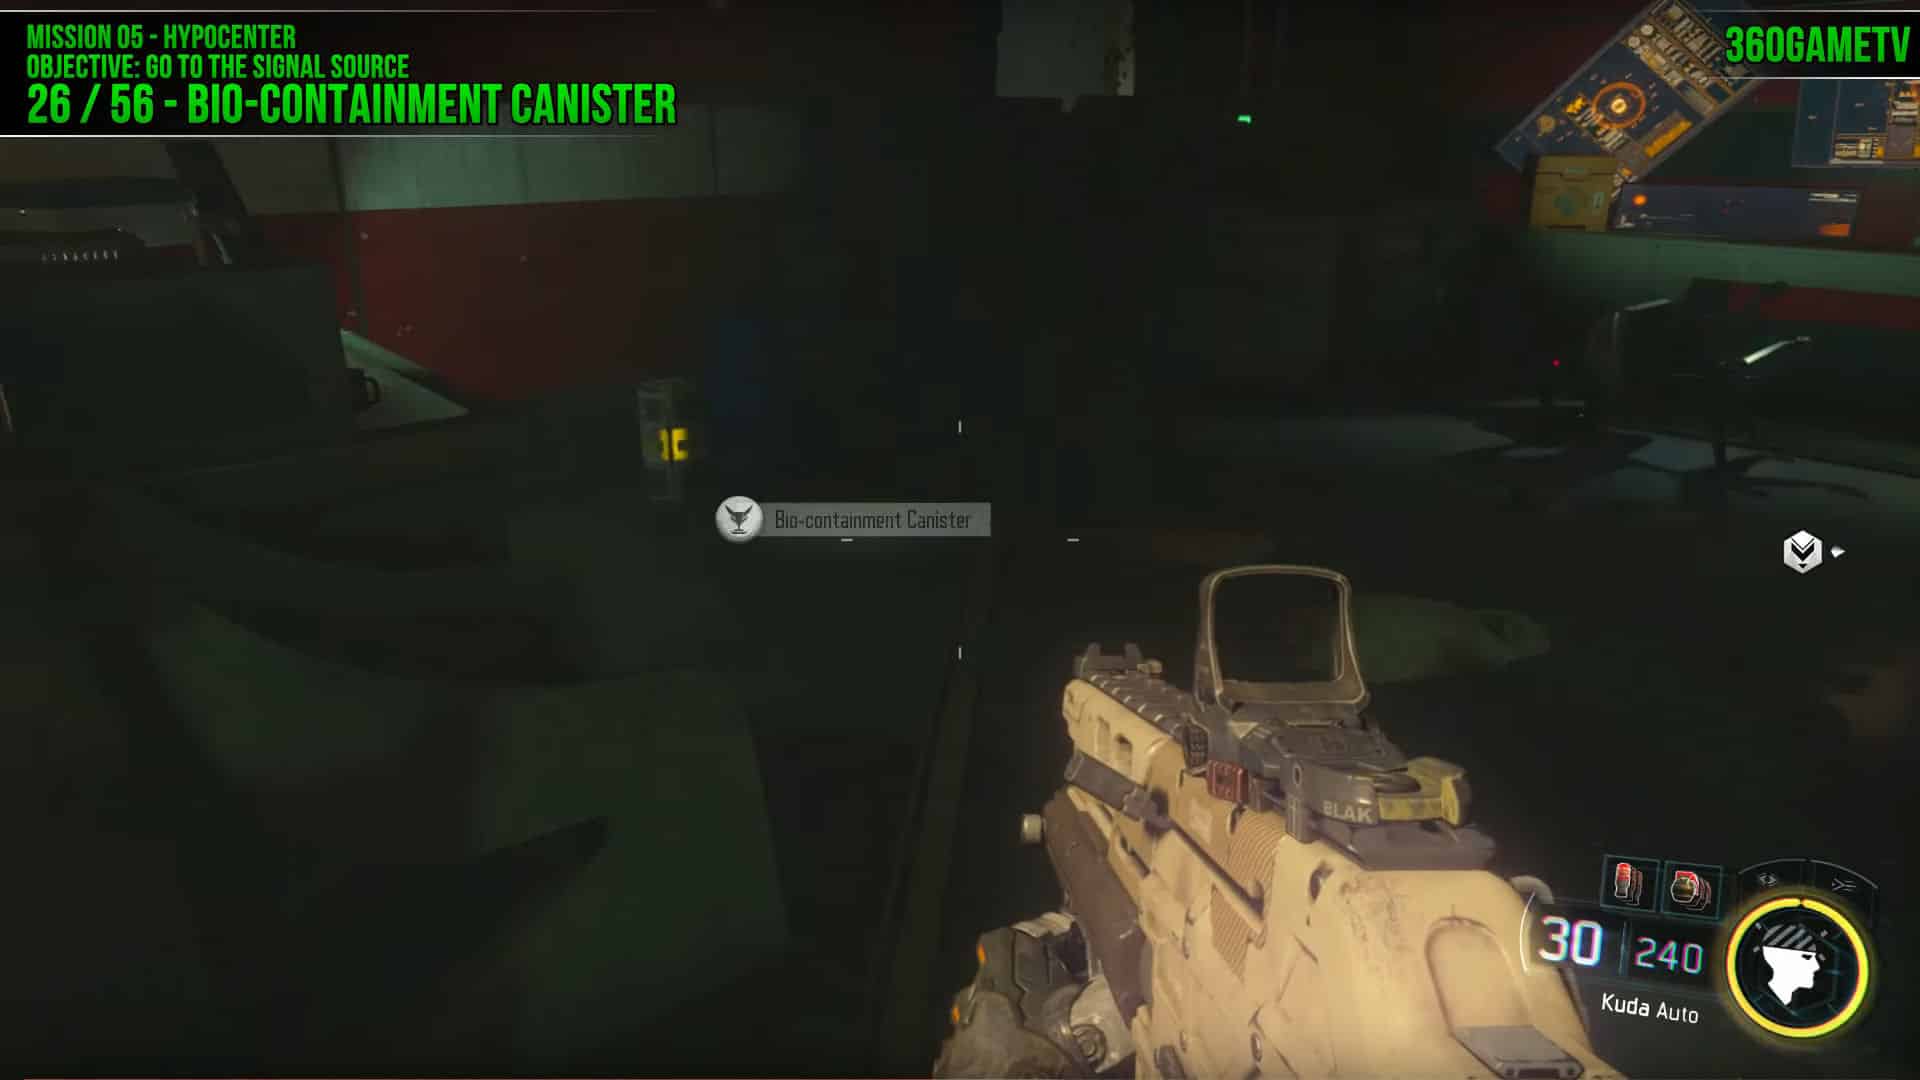 Call of Duty: Black Ops 3 Bio-Containment Canister Location in Mission 5: Hypocenter1920 x 1080